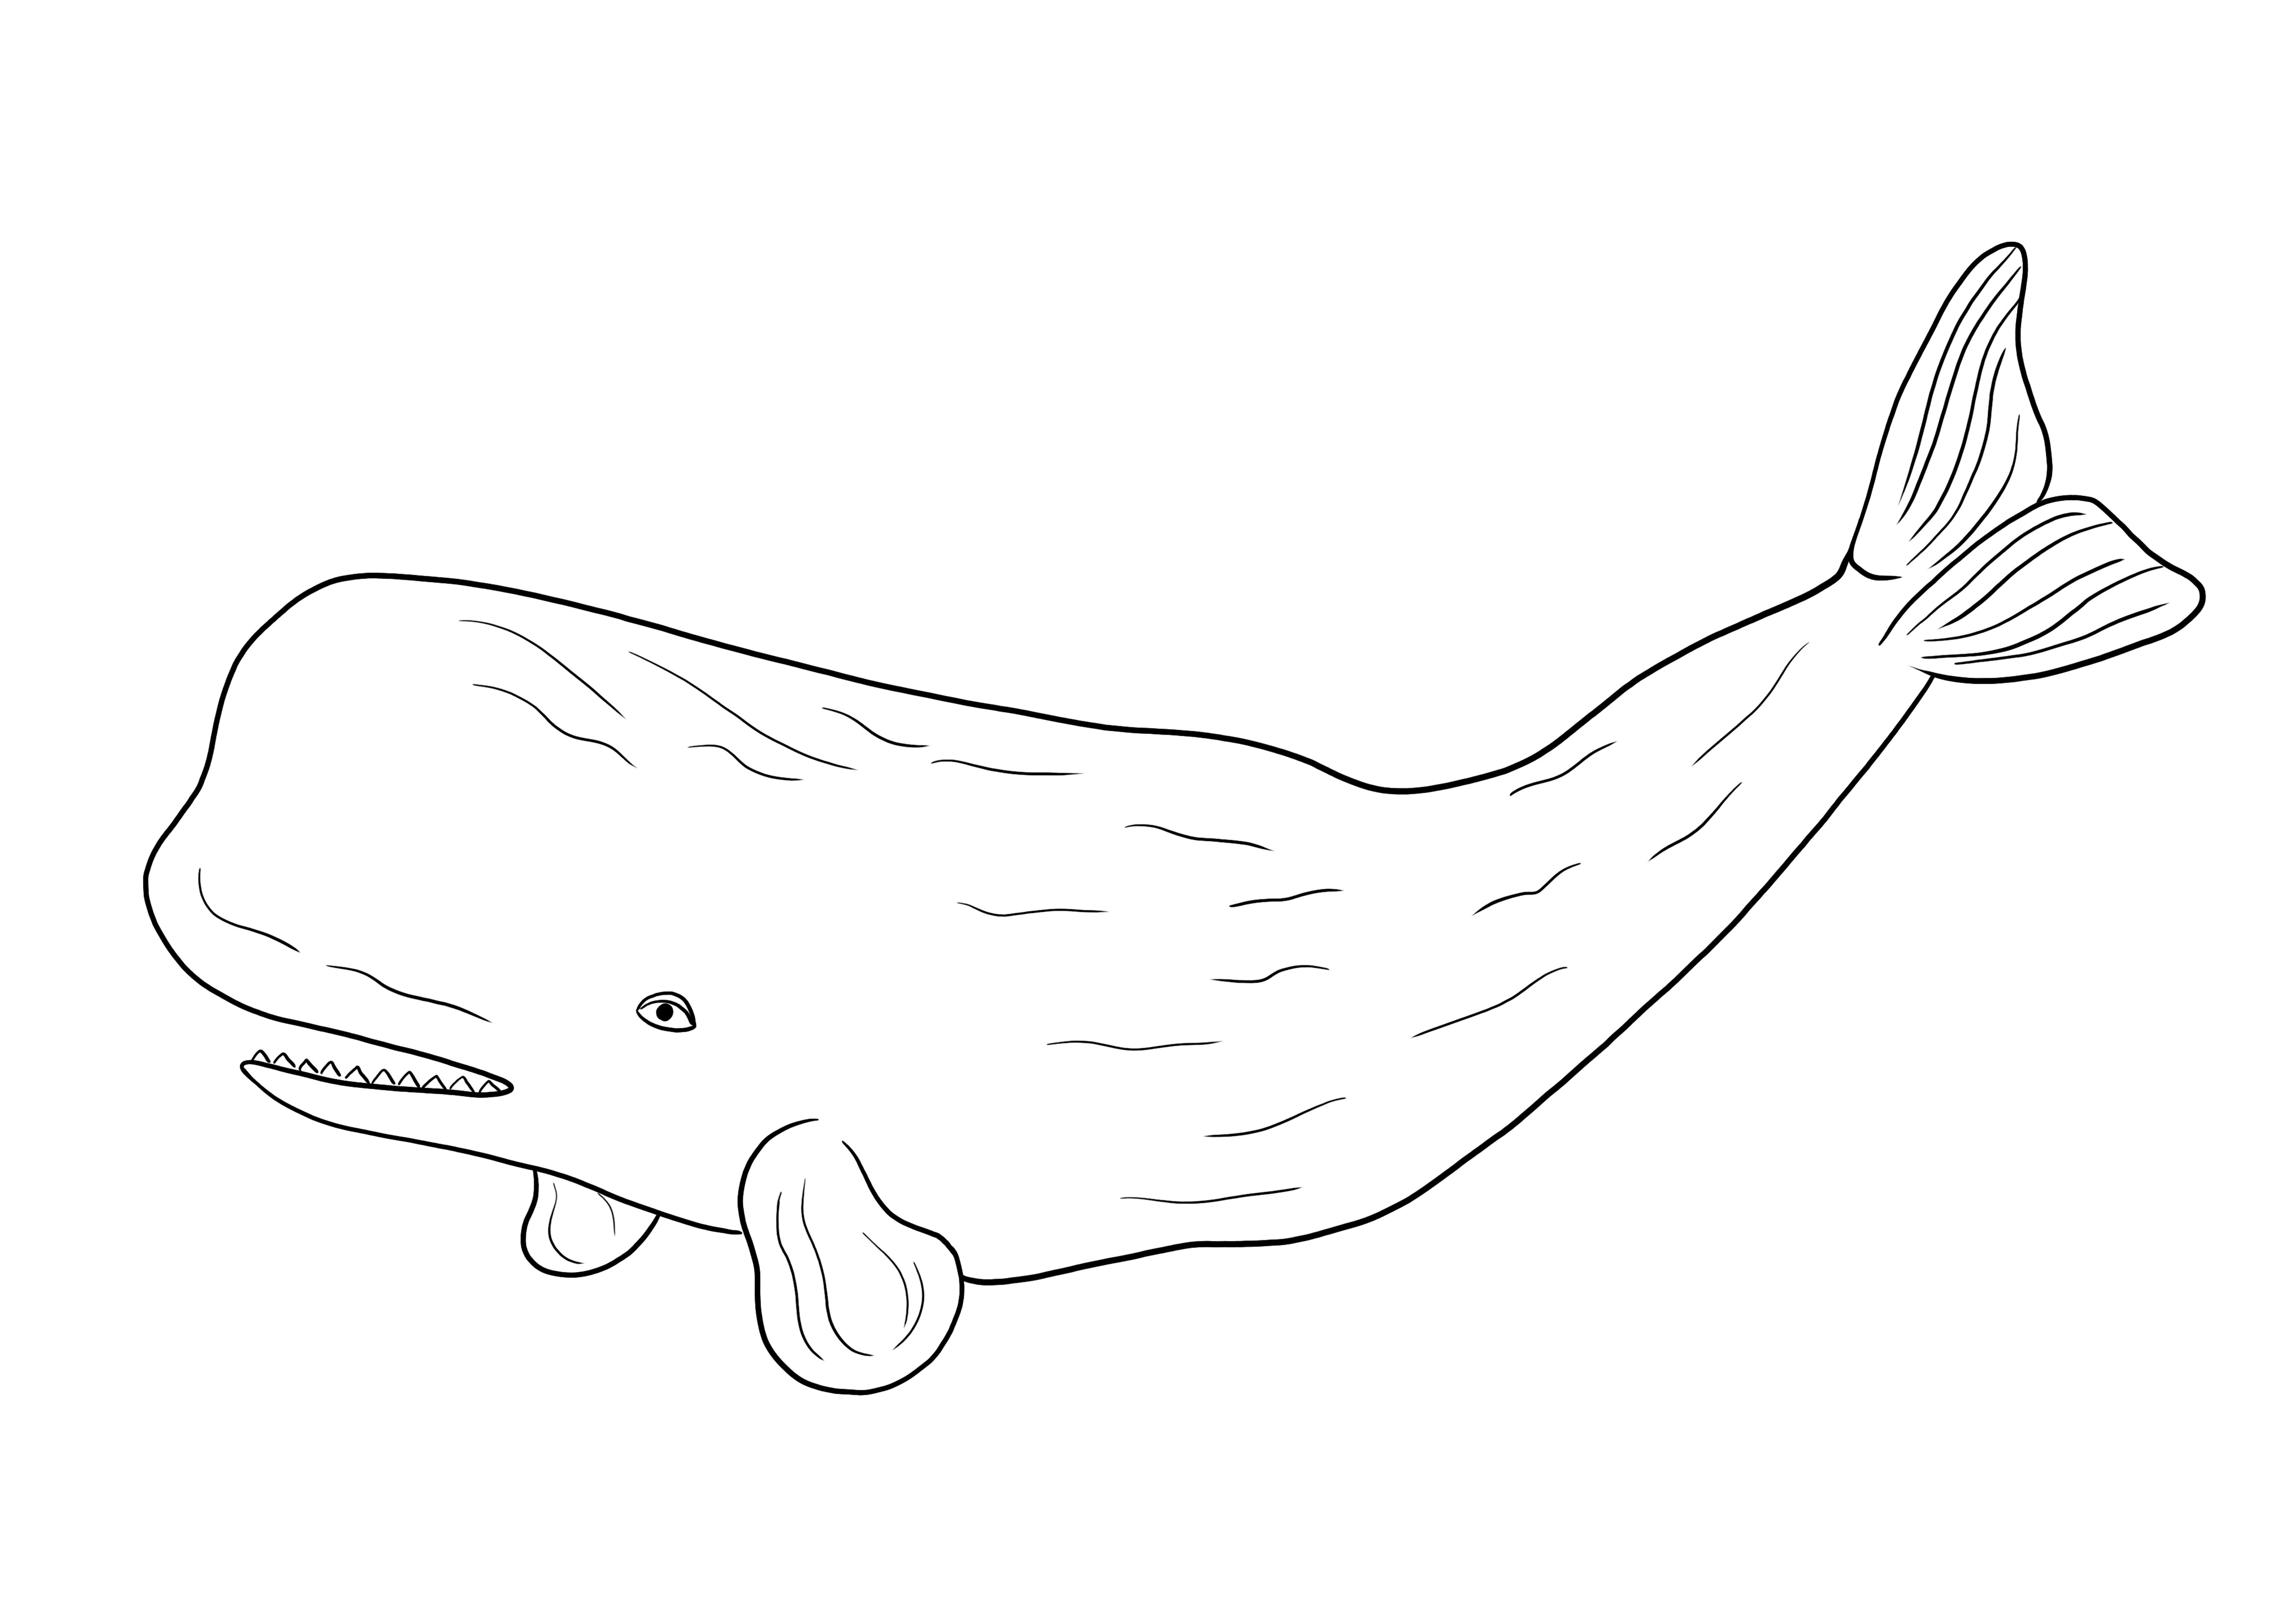 Sperm Whale-free printable for coloring image to use for kids